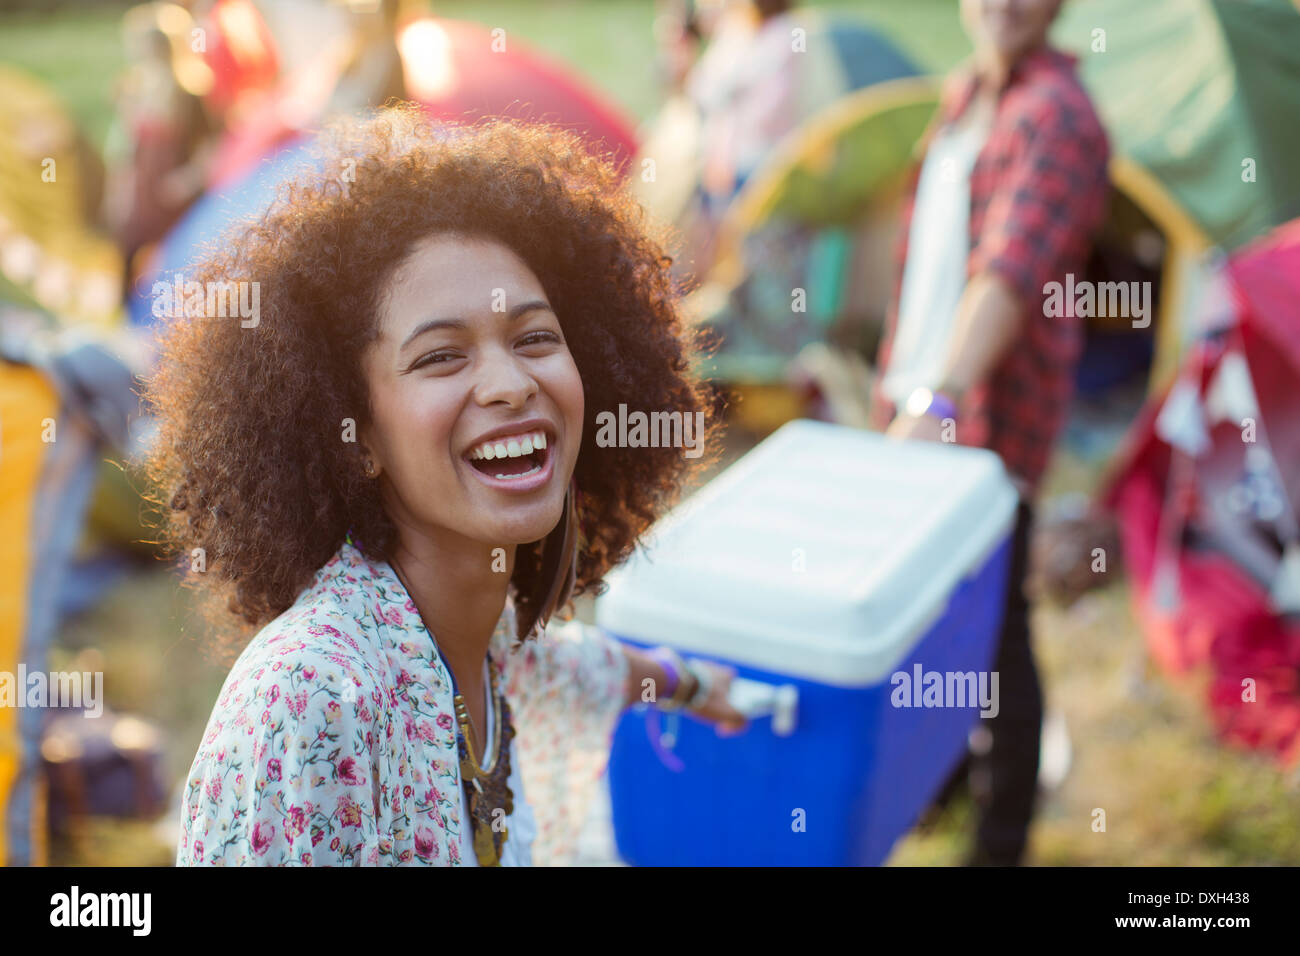 Portrait of laughing woman helping man carry cooler outside tents at music festival Stock Photo